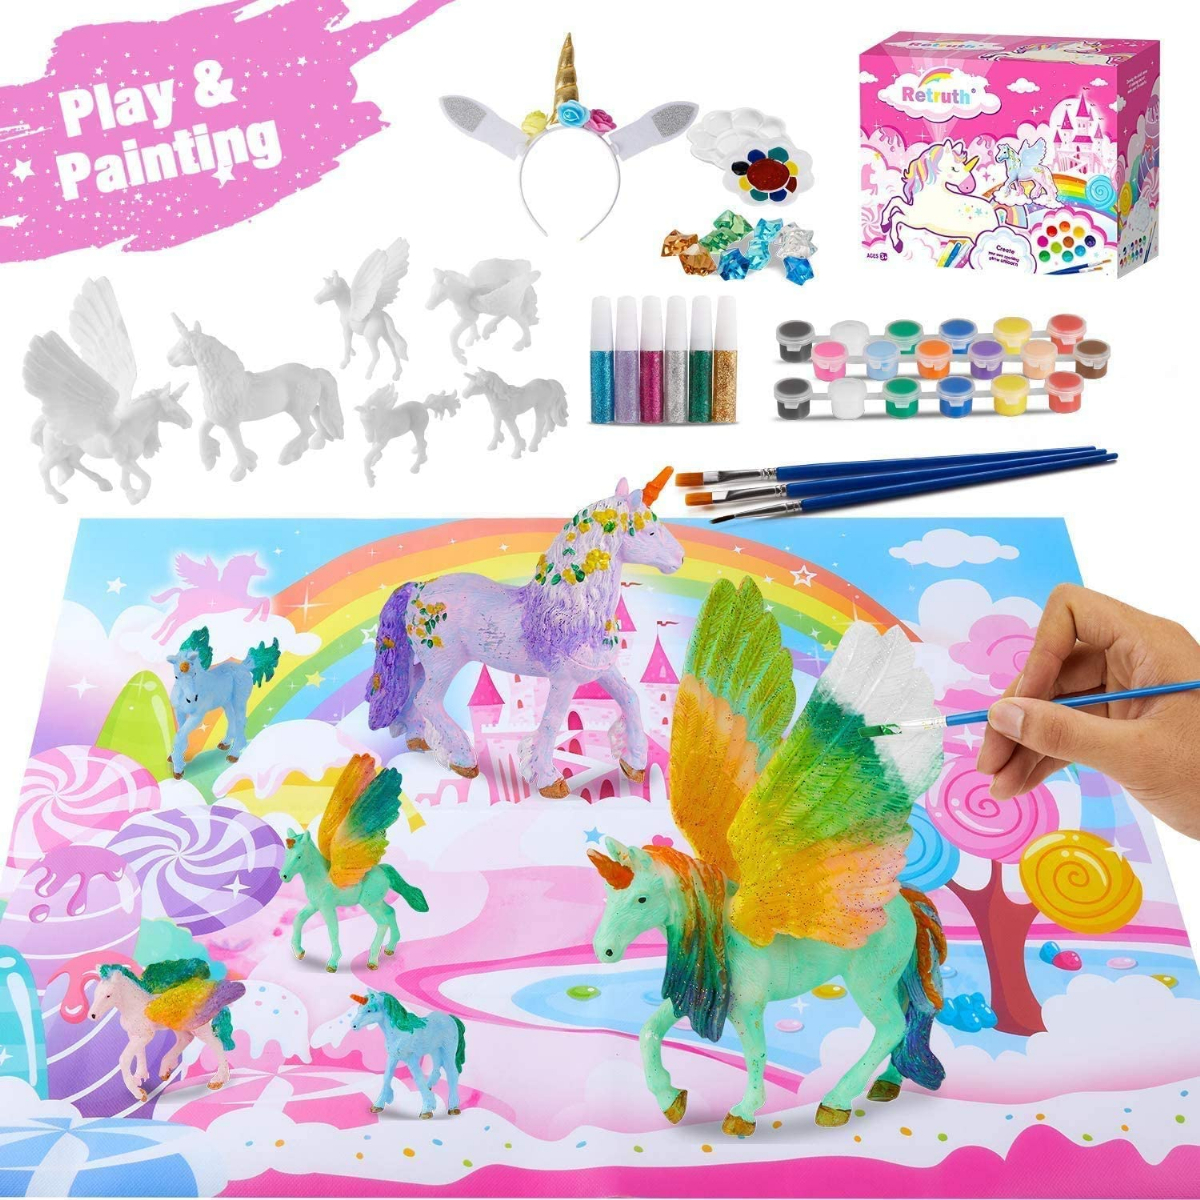 Retruth Kids Unicorn Painting Kits w/ Unicorn Hairband, Kids Painting Toys for Girls, Kids Unicorn Arts and Crafts with Glitter Pigment Painting Kits for Age 4 5 6 7 8, DIY Paint Your Own Unicorn